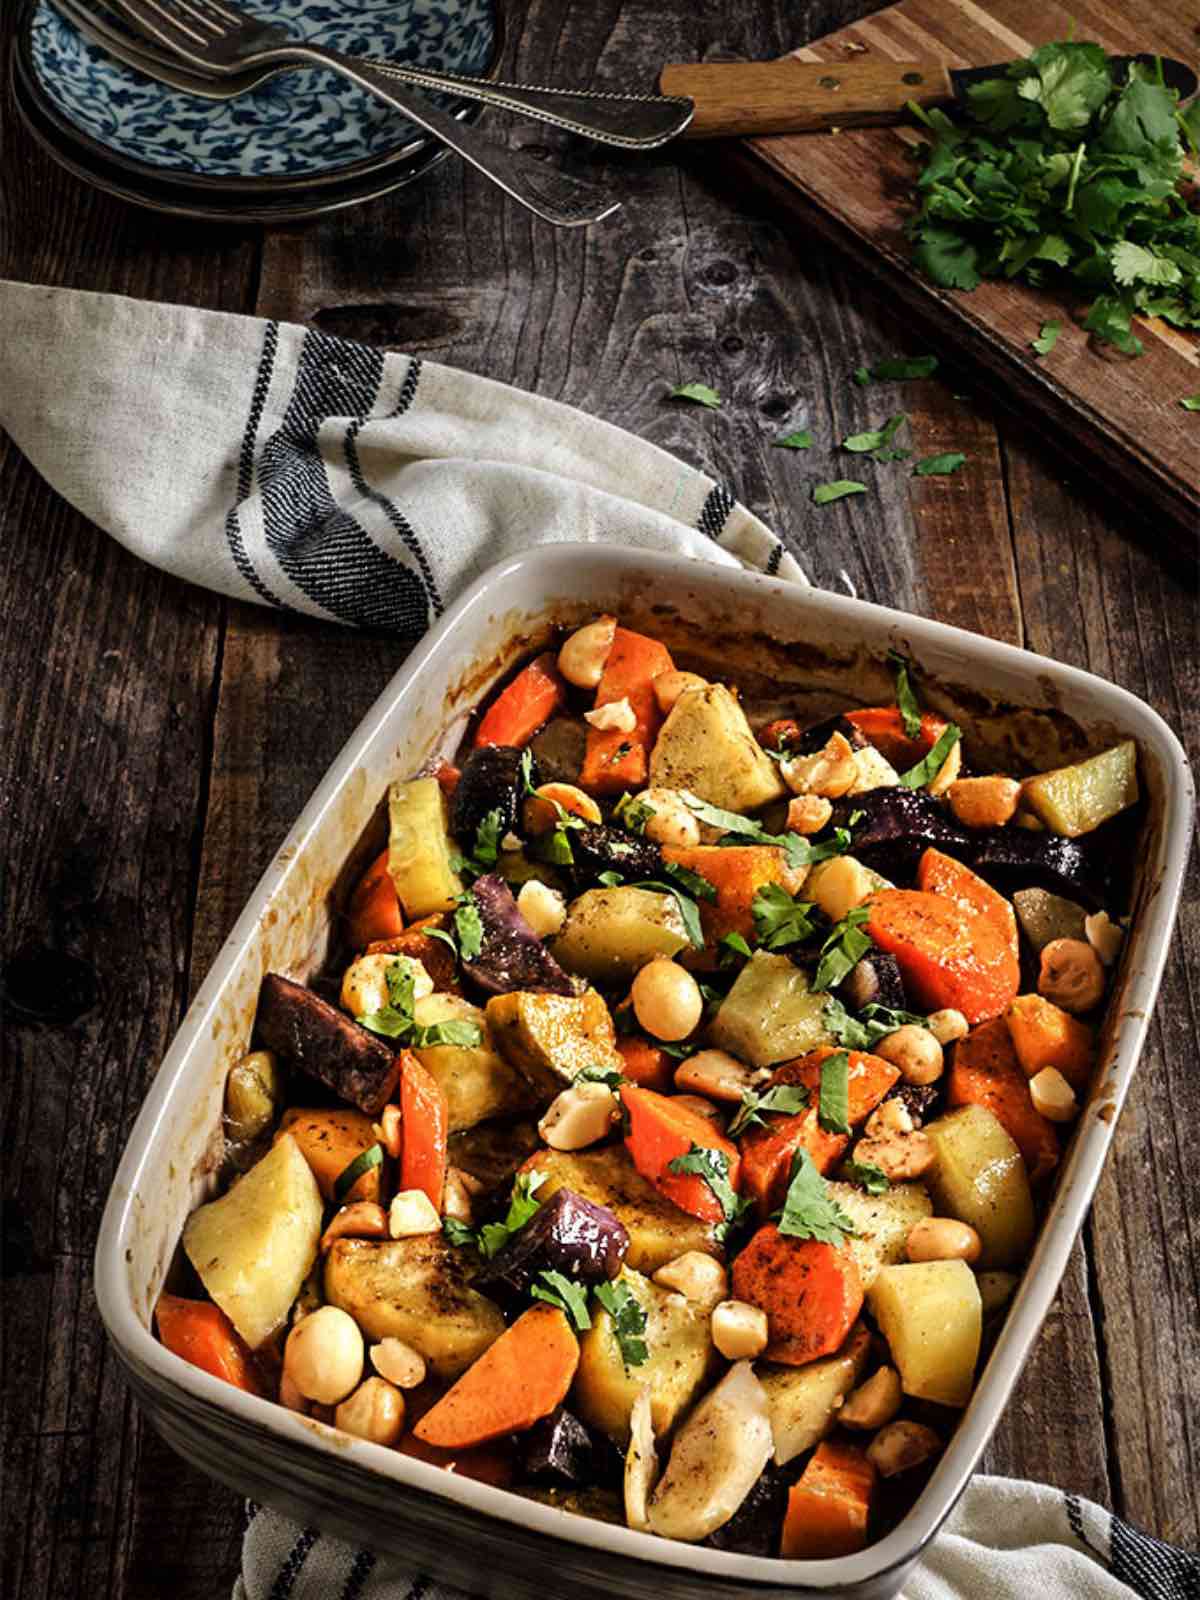 A baking dish full of roasted root vegetables including carrots. 